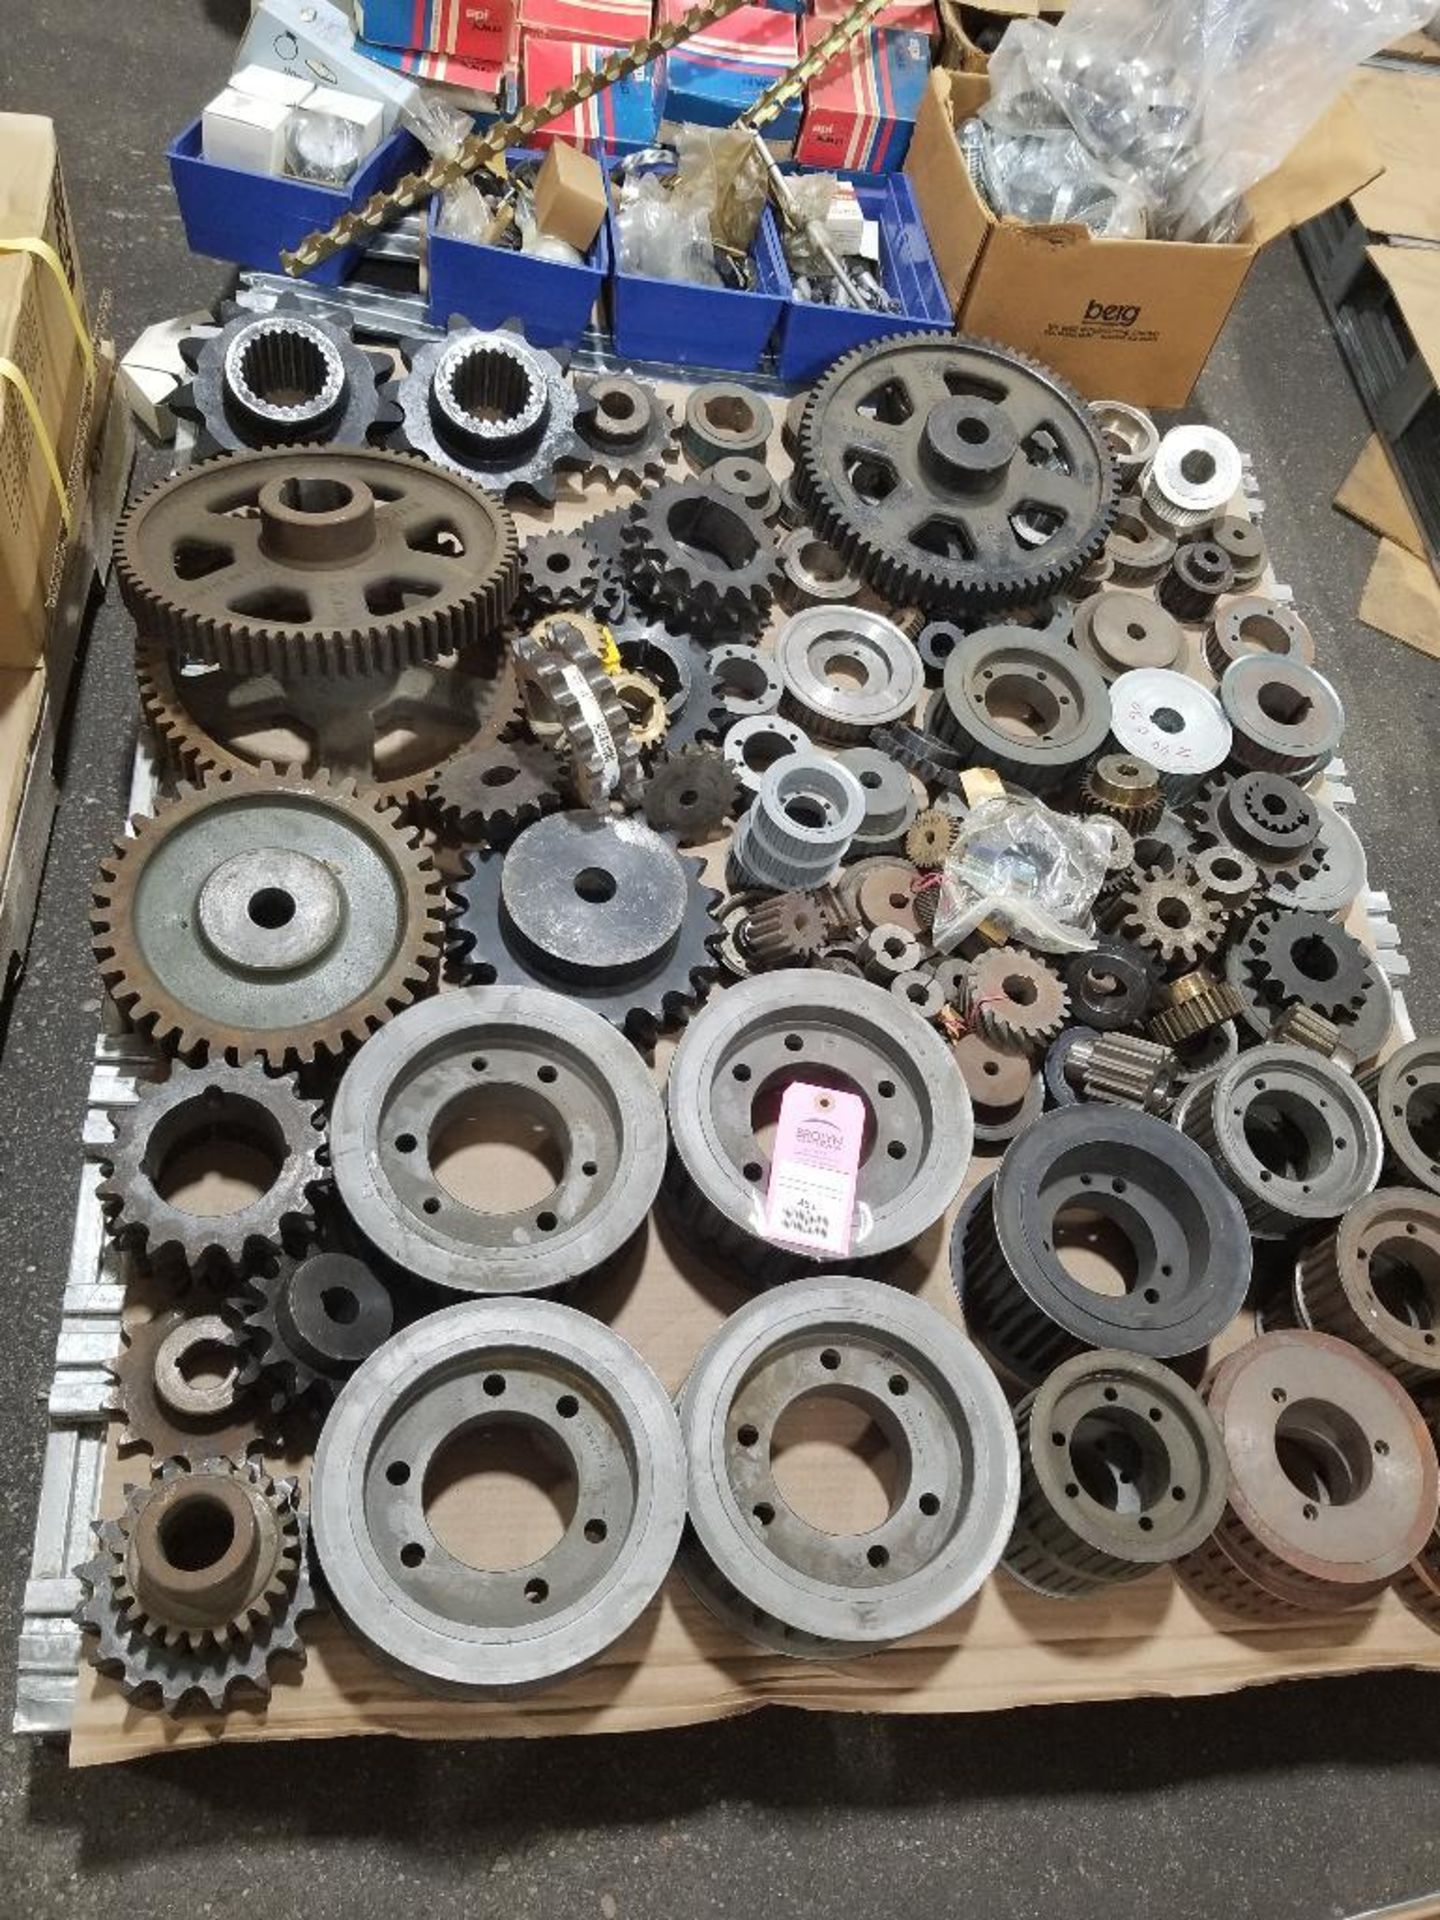 Pallet of assorted gears, pulleys, and bushings. Most new old stock.